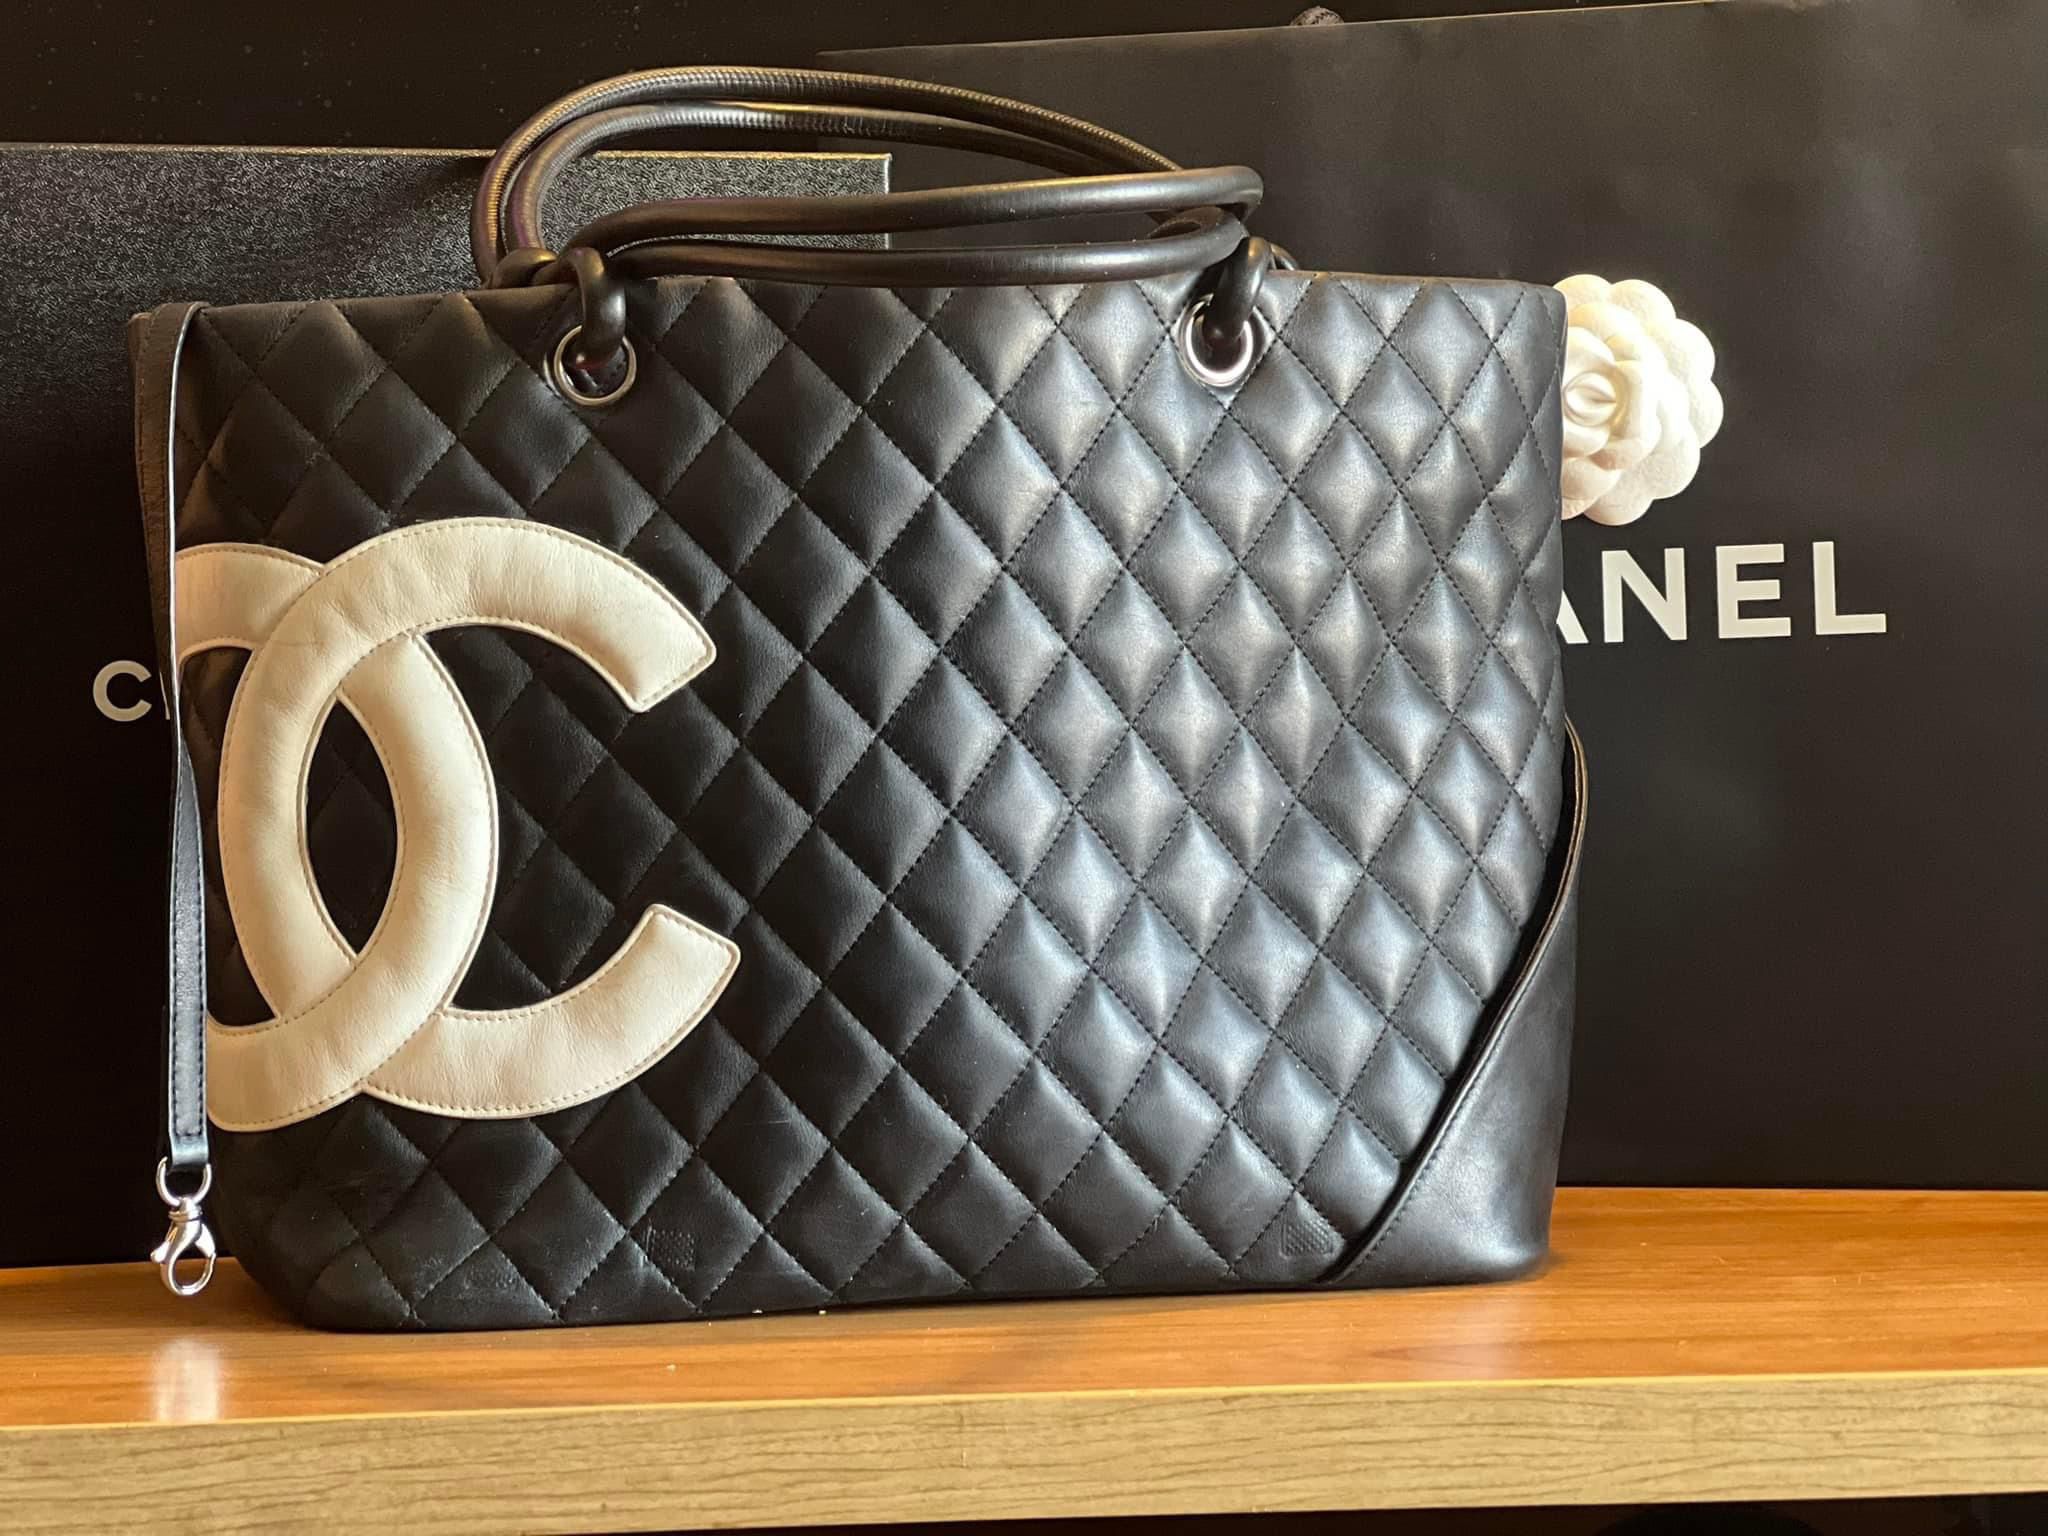 Large Calfskin Cambon Ligne Diamond Quilted Tote Bag in Black with White CC  and Hot Pink Logo Interior Circa 2005-2006 Down To $1,400 Labor Day Sale  for Sale in Henderson, NV - OfferUp